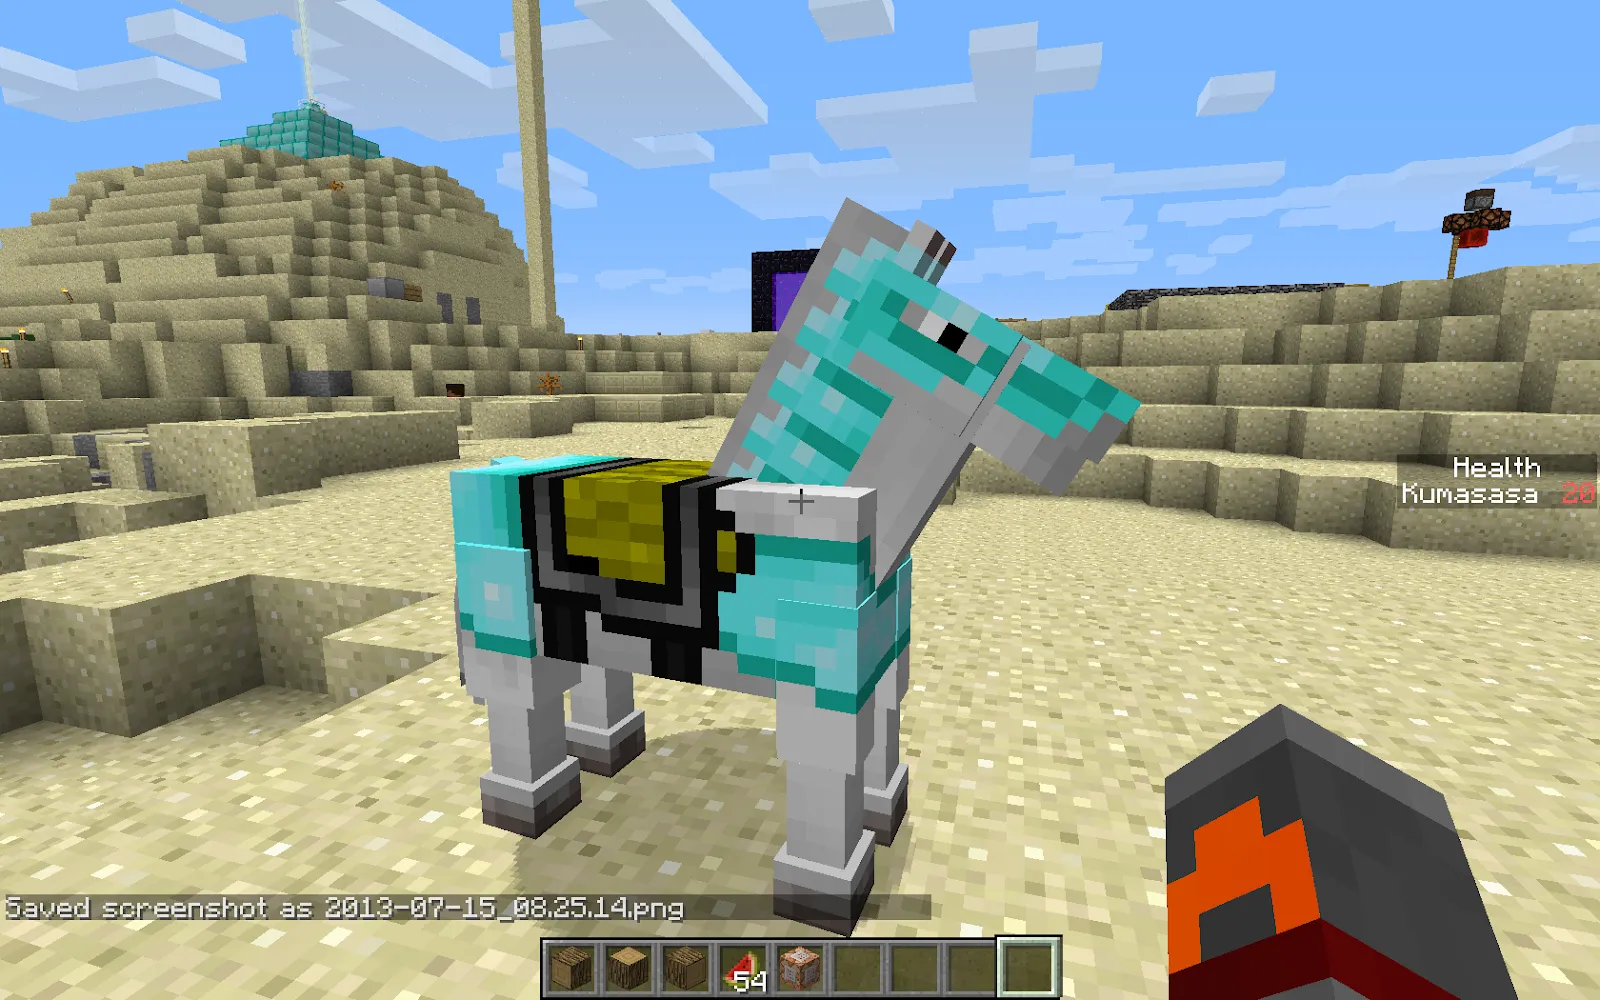 Image of a white horse wearing diamond armor